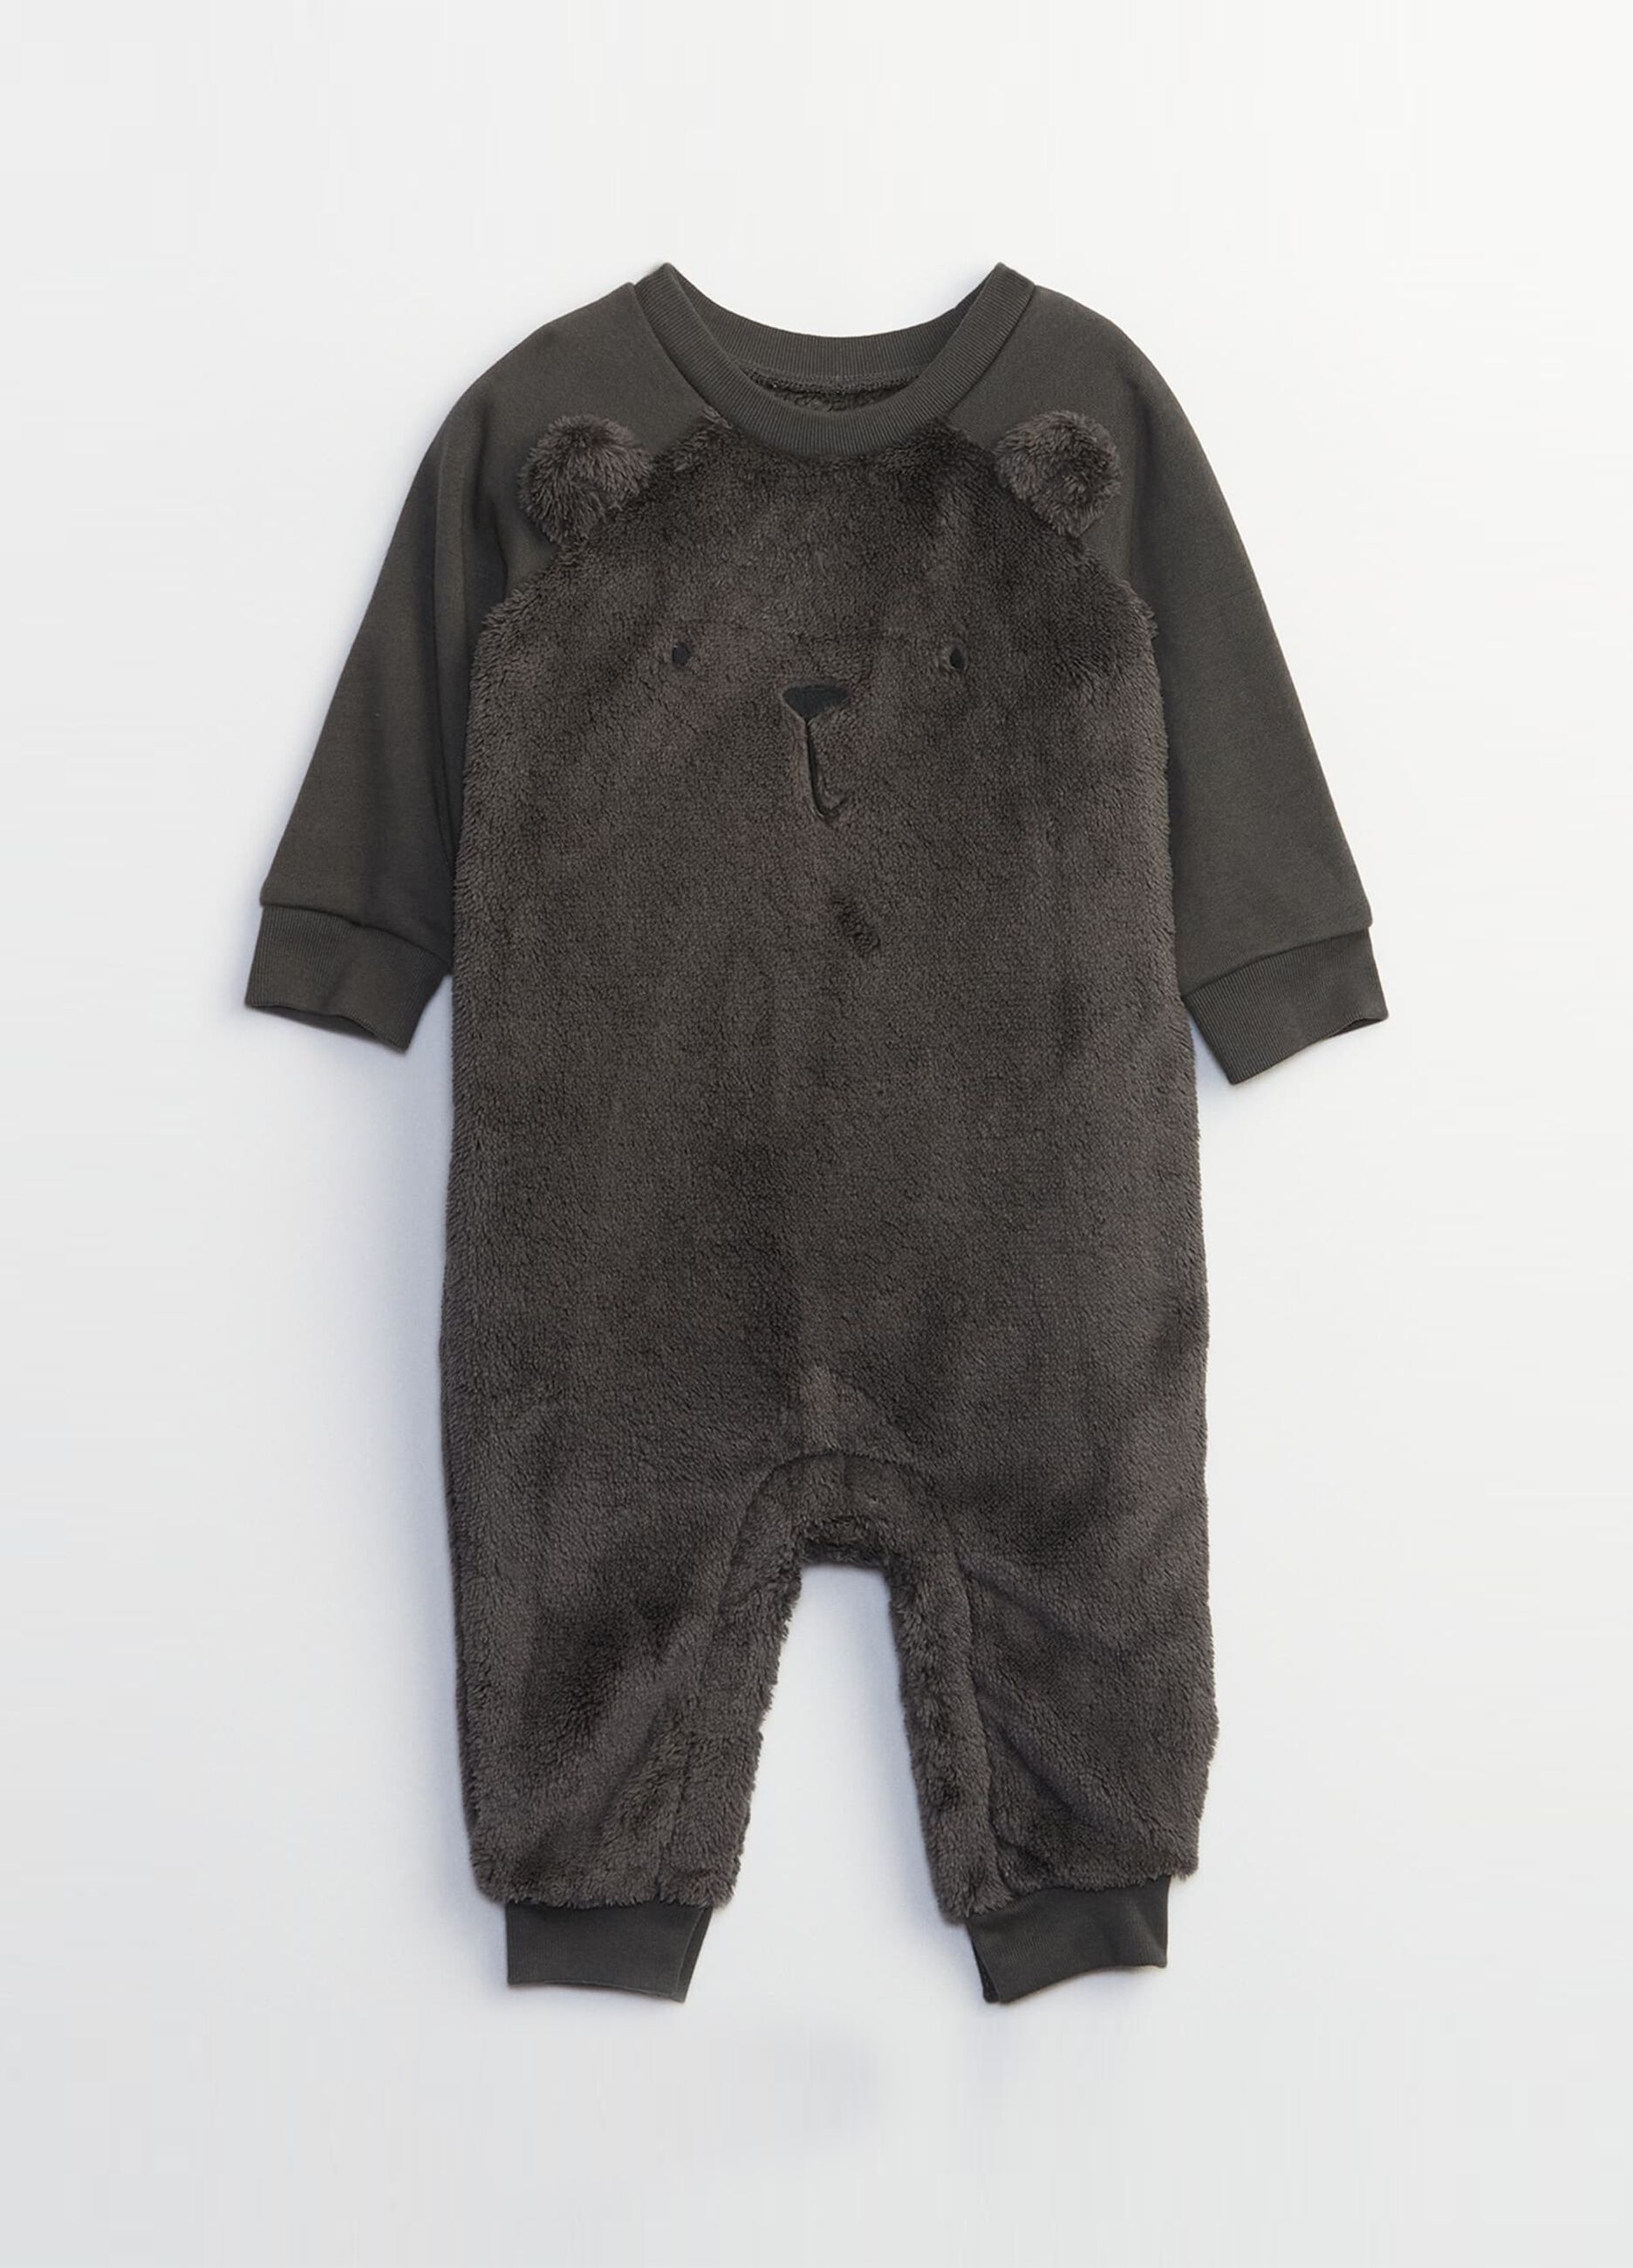 Faux fur onesie with embroidered teddy